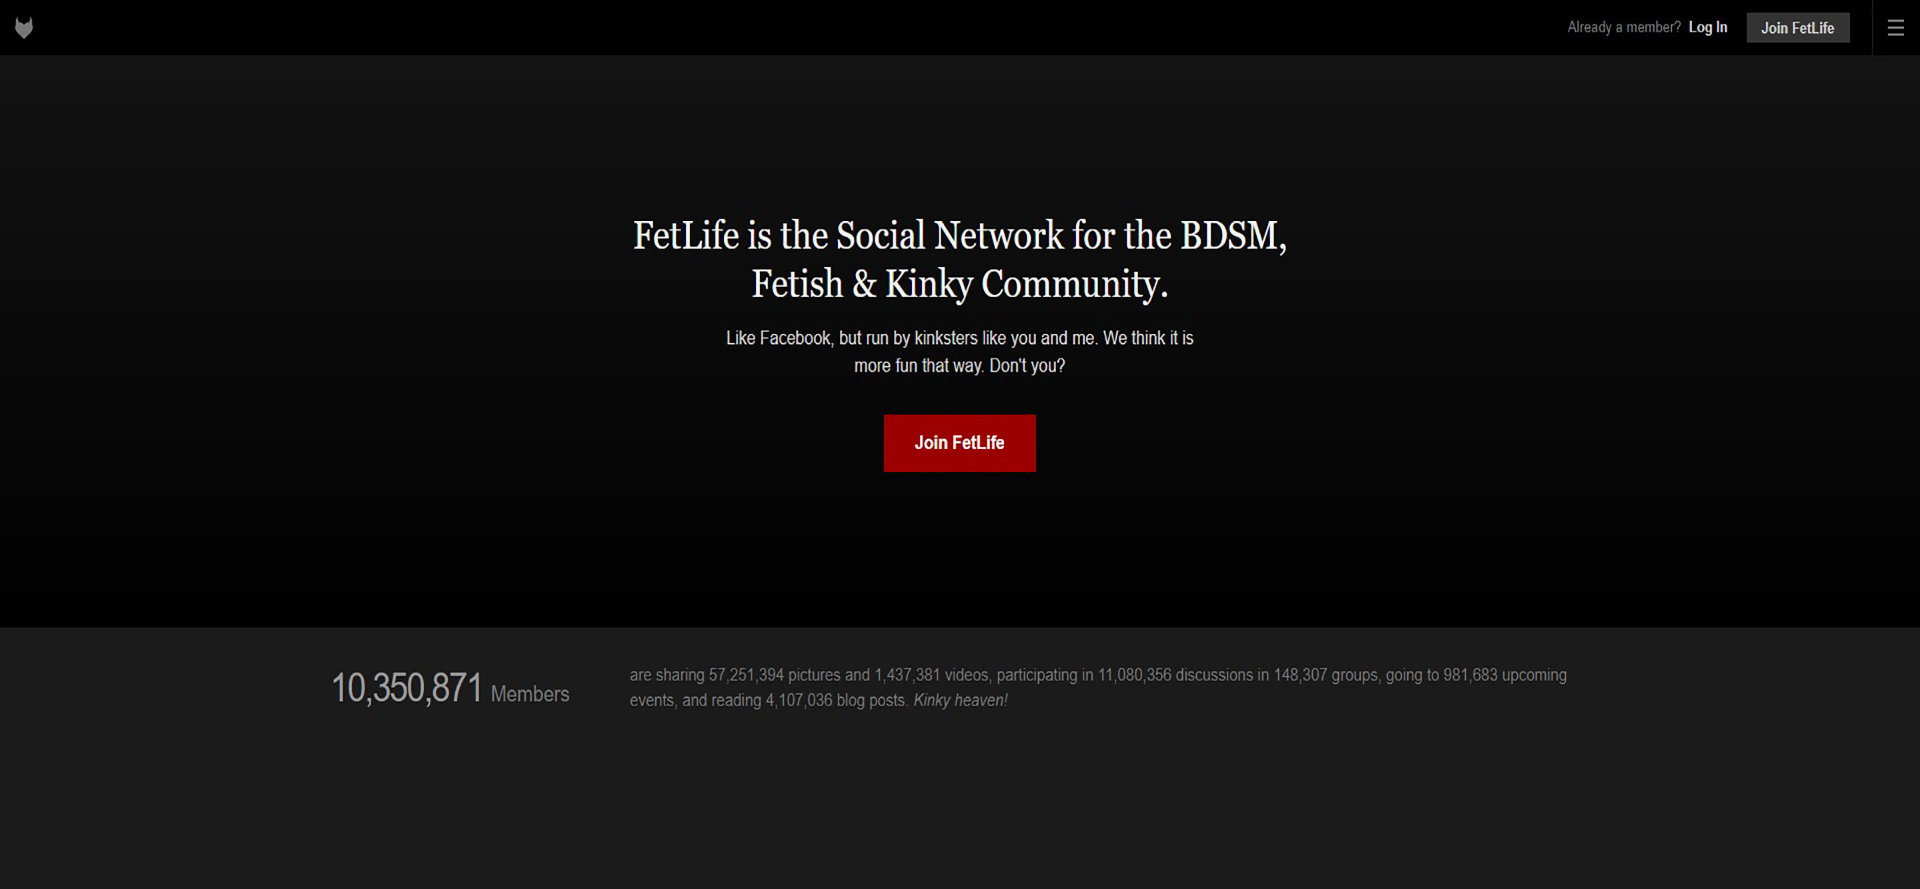 To download pictures from fetlife